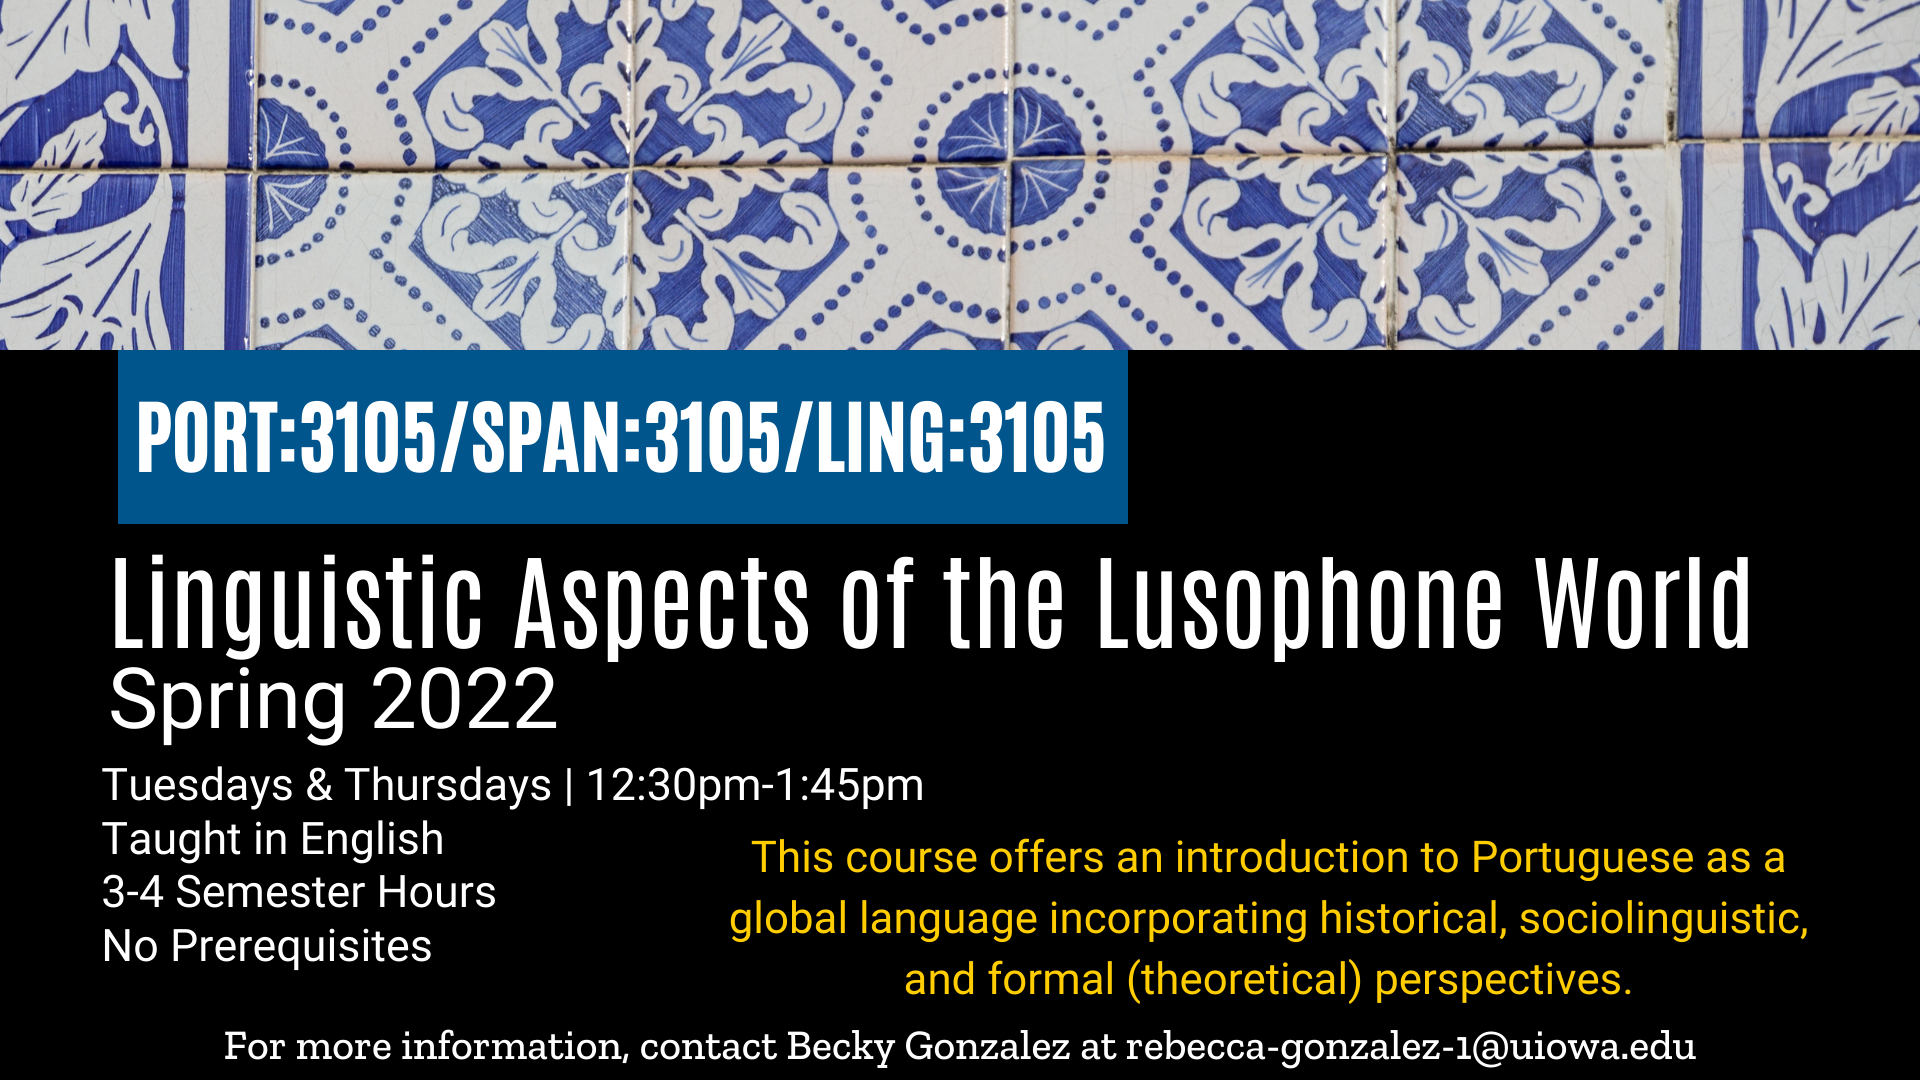 PORT:3105/SPAN:3105/LING:3105: Linguistic Aspects of the Lusophone World  Spring 2022  Tuesday/Thursday 12:30pm-1:45pm Taught in English 4 semester hours no prerequisites This course offers an introduction to Portuguese as a global language incorporating historical, sociolinguistic, and formal (theoretical) perspectives. for more information contact Becky Gonzalez at rebecca-gonzalez-1@uiowa.edu